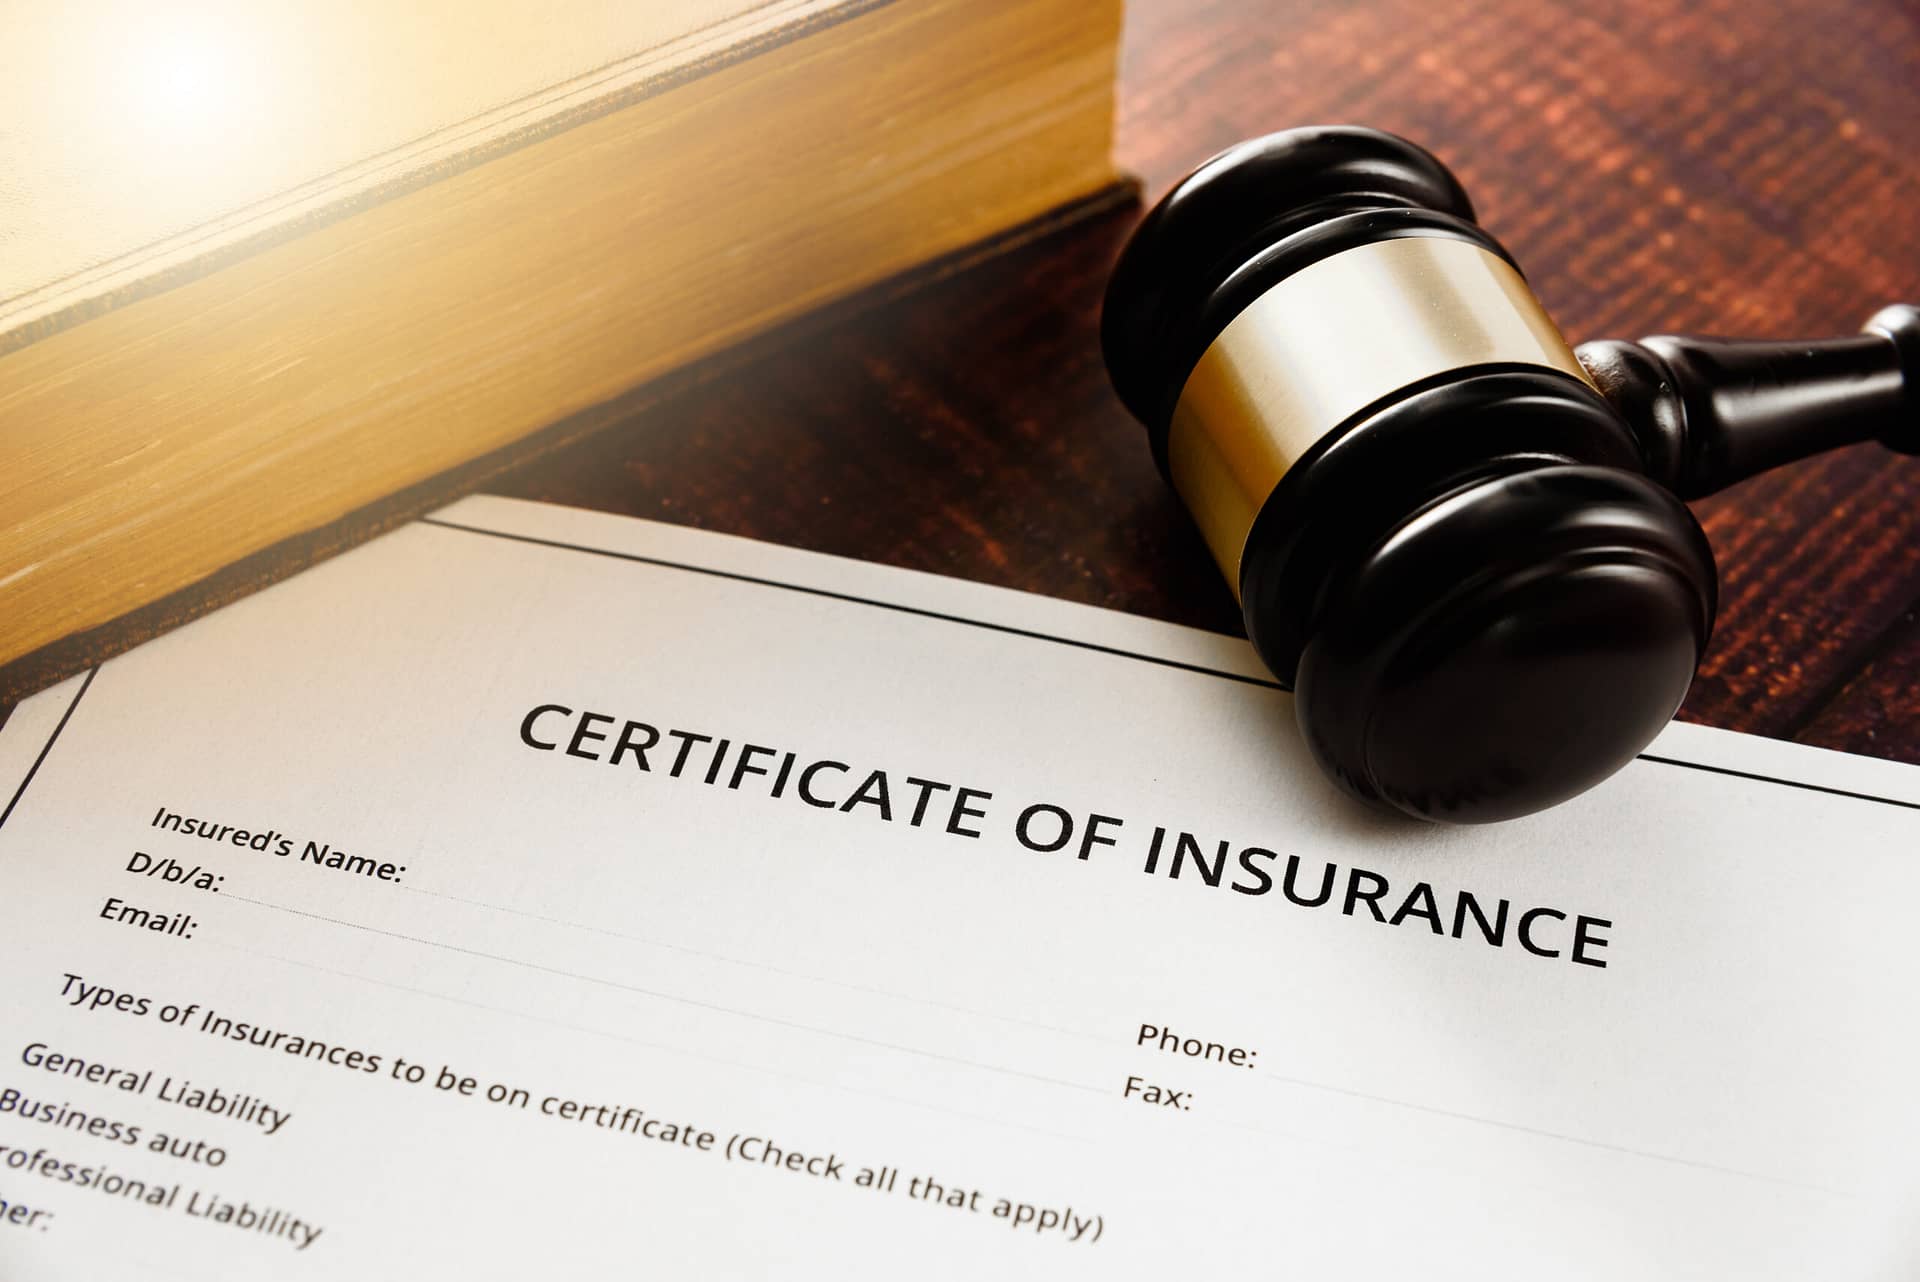 Certificate Of Insurance: What Is It and How Do I Get It?